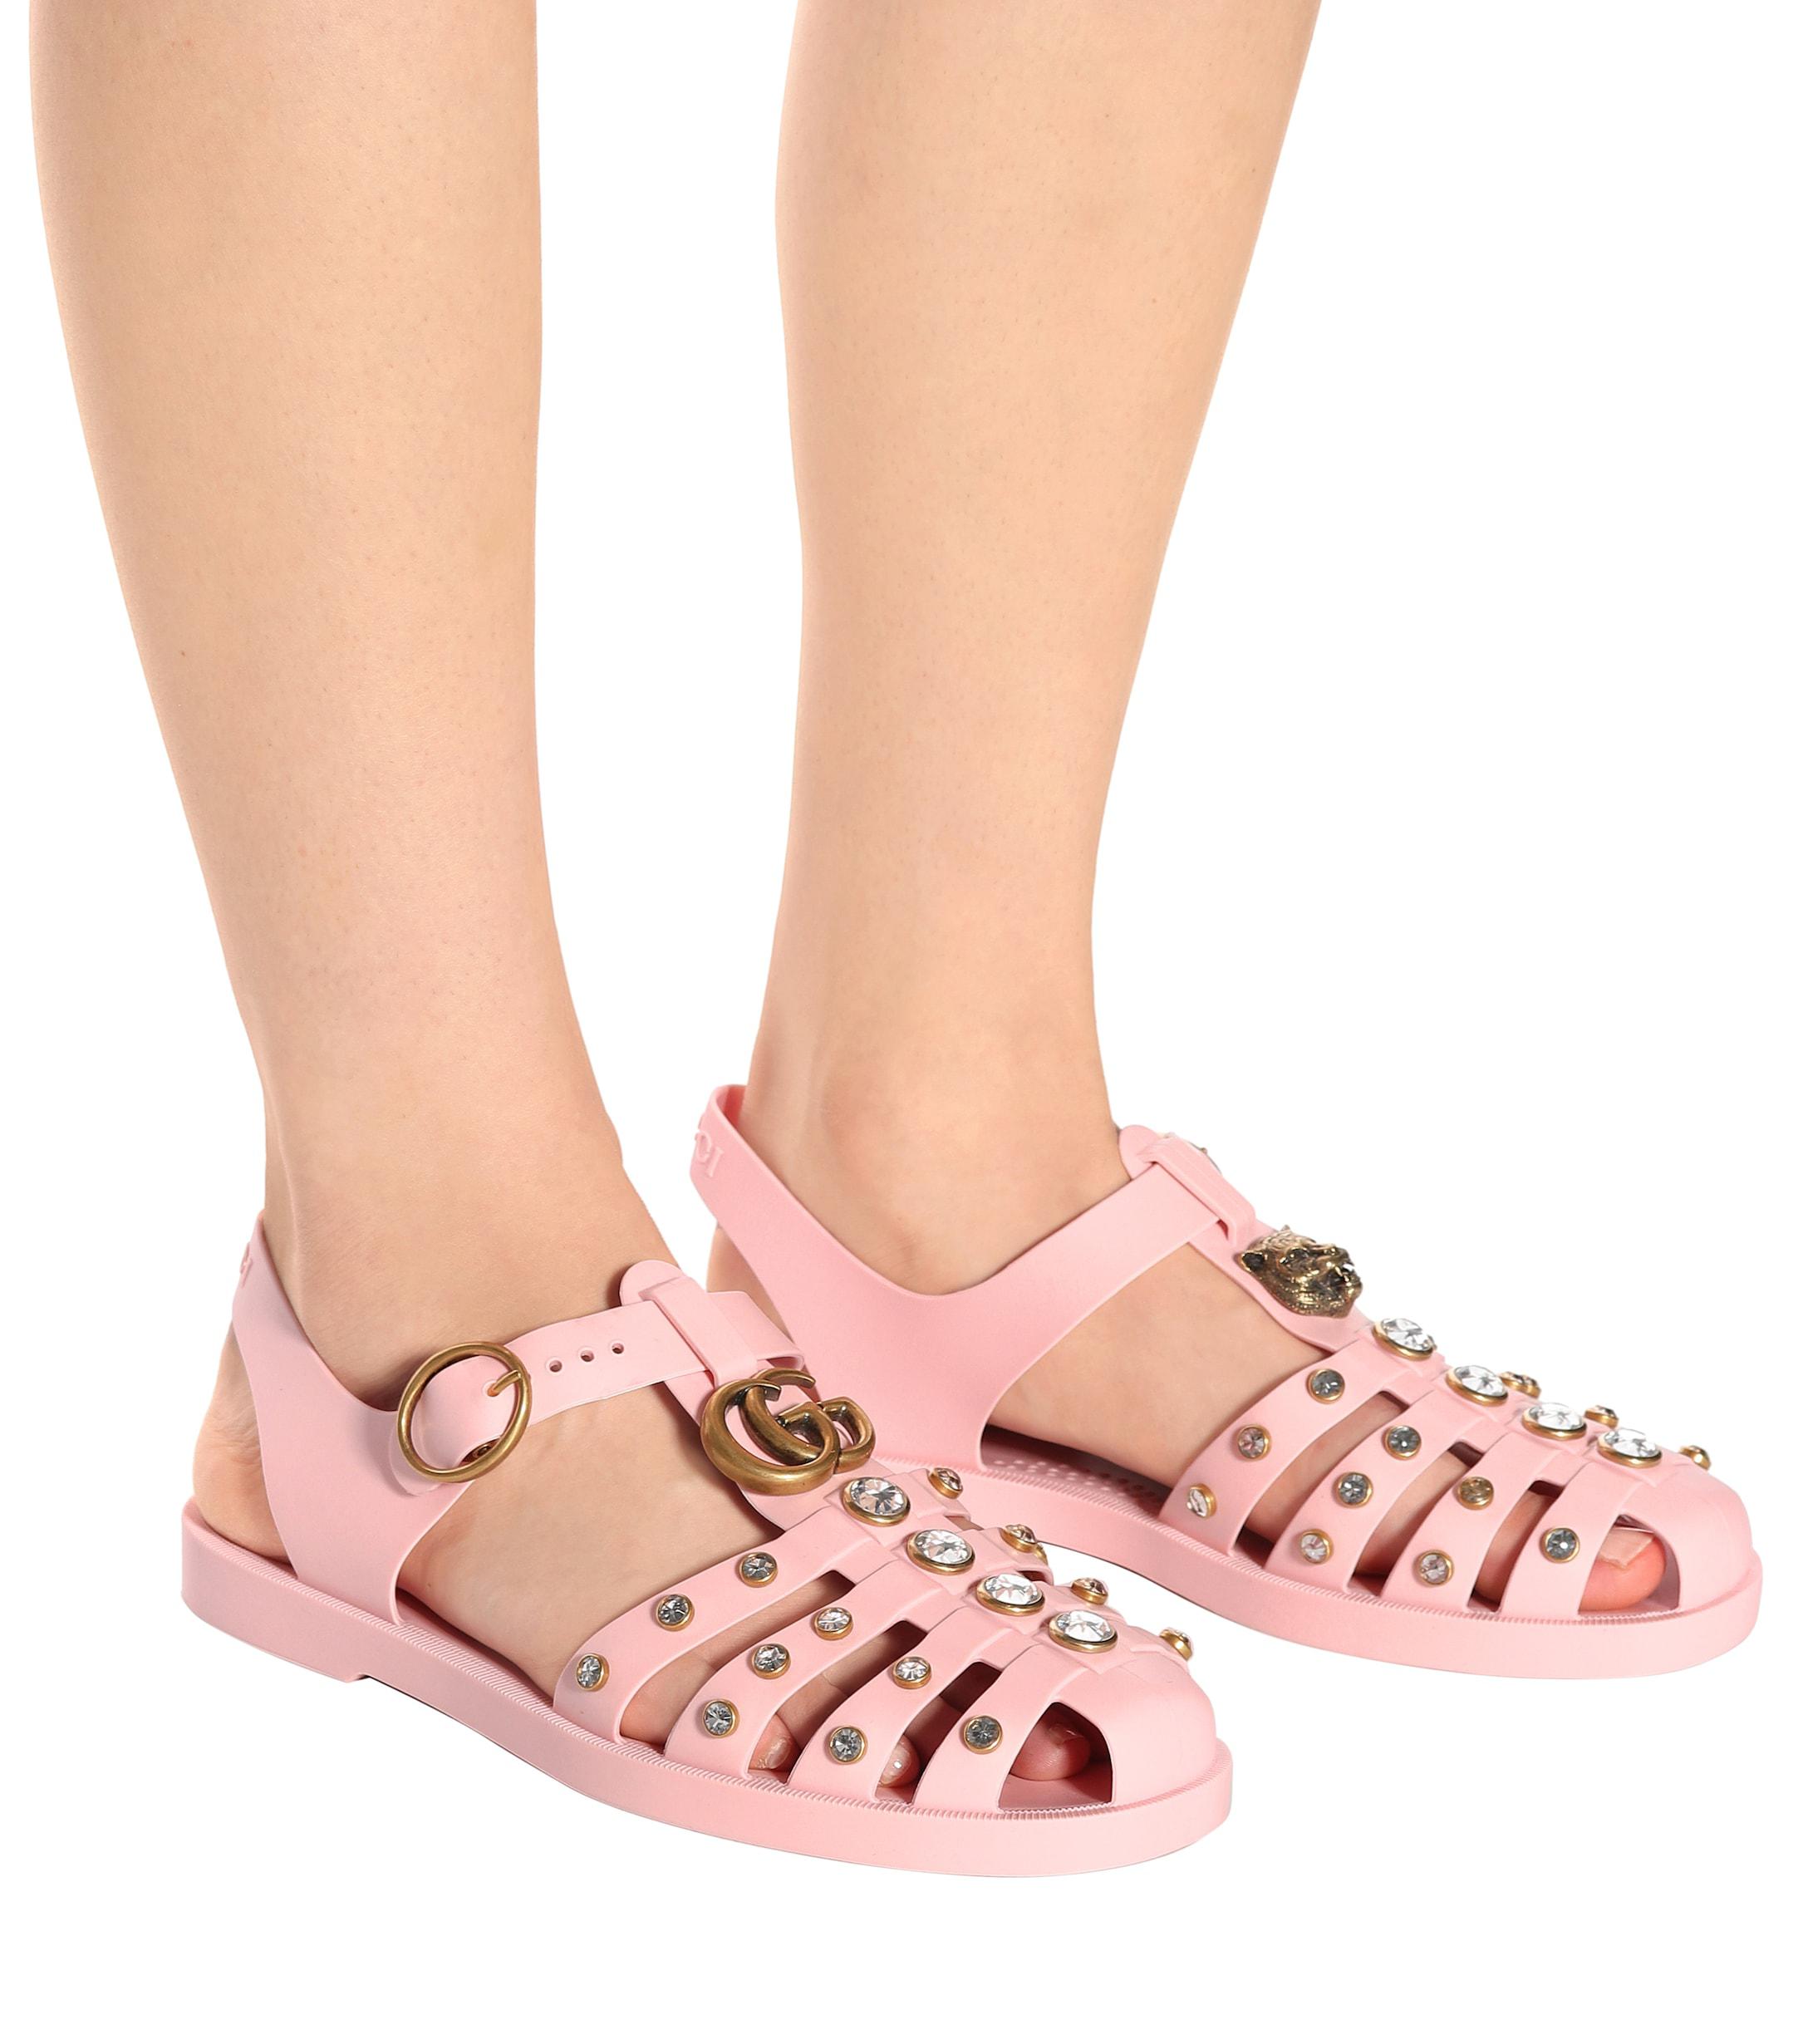 Oprecht Veeg Optimisme Gucci Crystal-embellished Jelly Sandals in Pink | Lyst